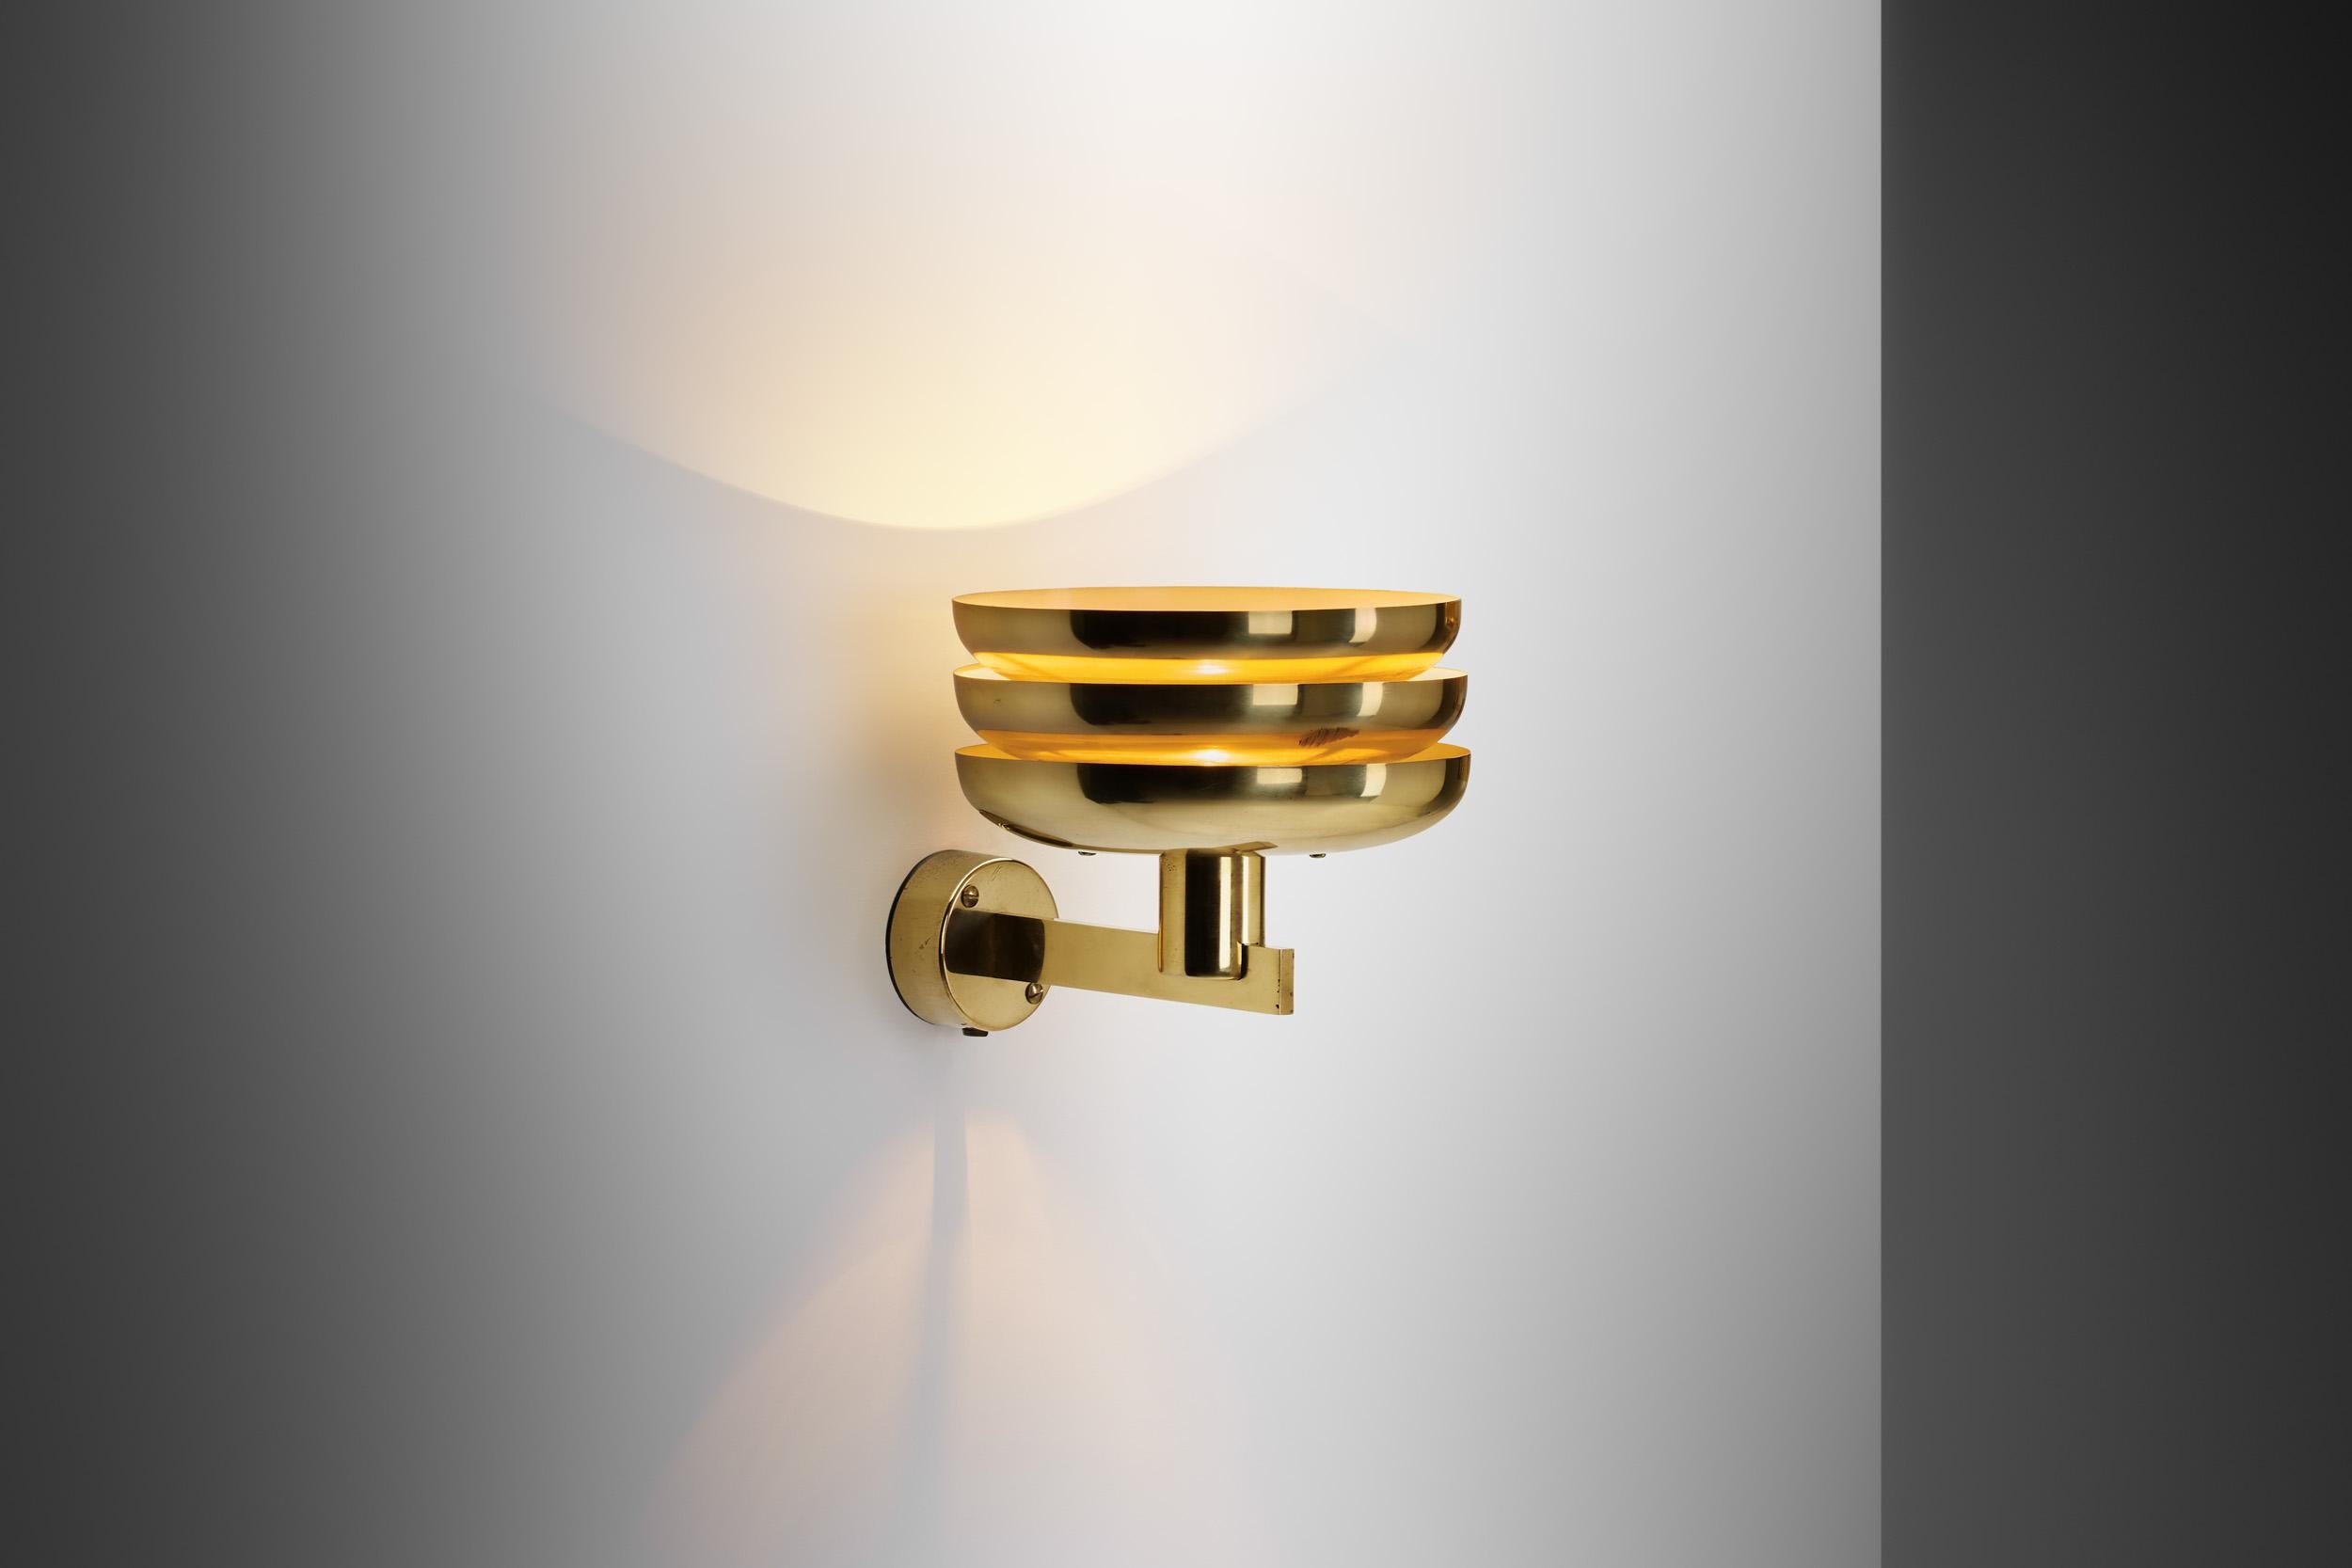 Hans-Agne Jakobsson's present “V361” wall light stands as exemplary pieces to the ingenuity of mid-century Swedish lighting design. Crafted in the 1950s for AB Markaryd, the luminaire encapsulates Jakobsson's profound influence on the mid-century